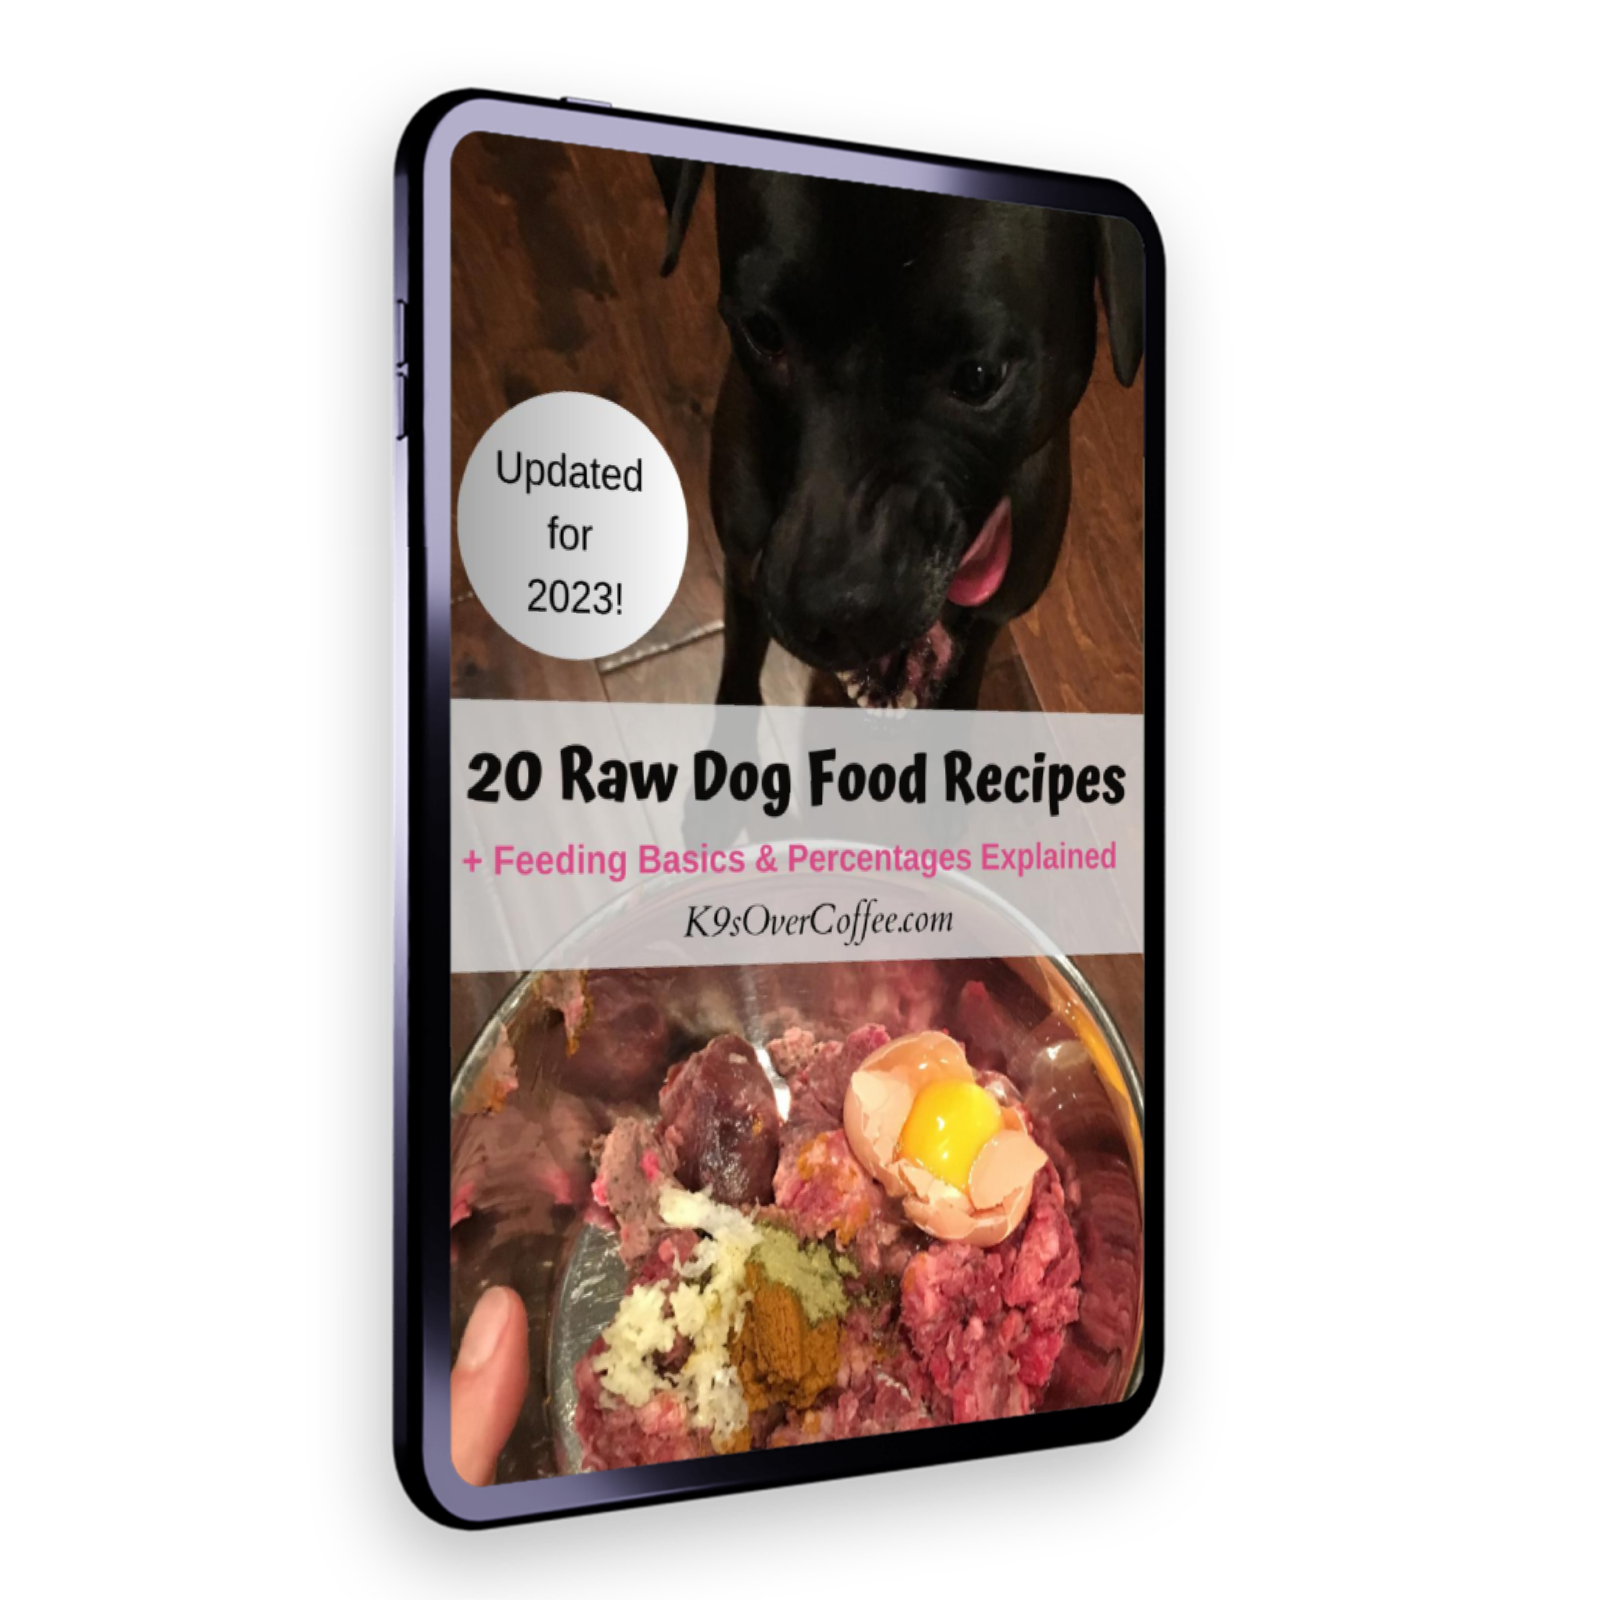 The ebook 20 raw dog food recipes is part of the discounted raw dog food ebook bundle